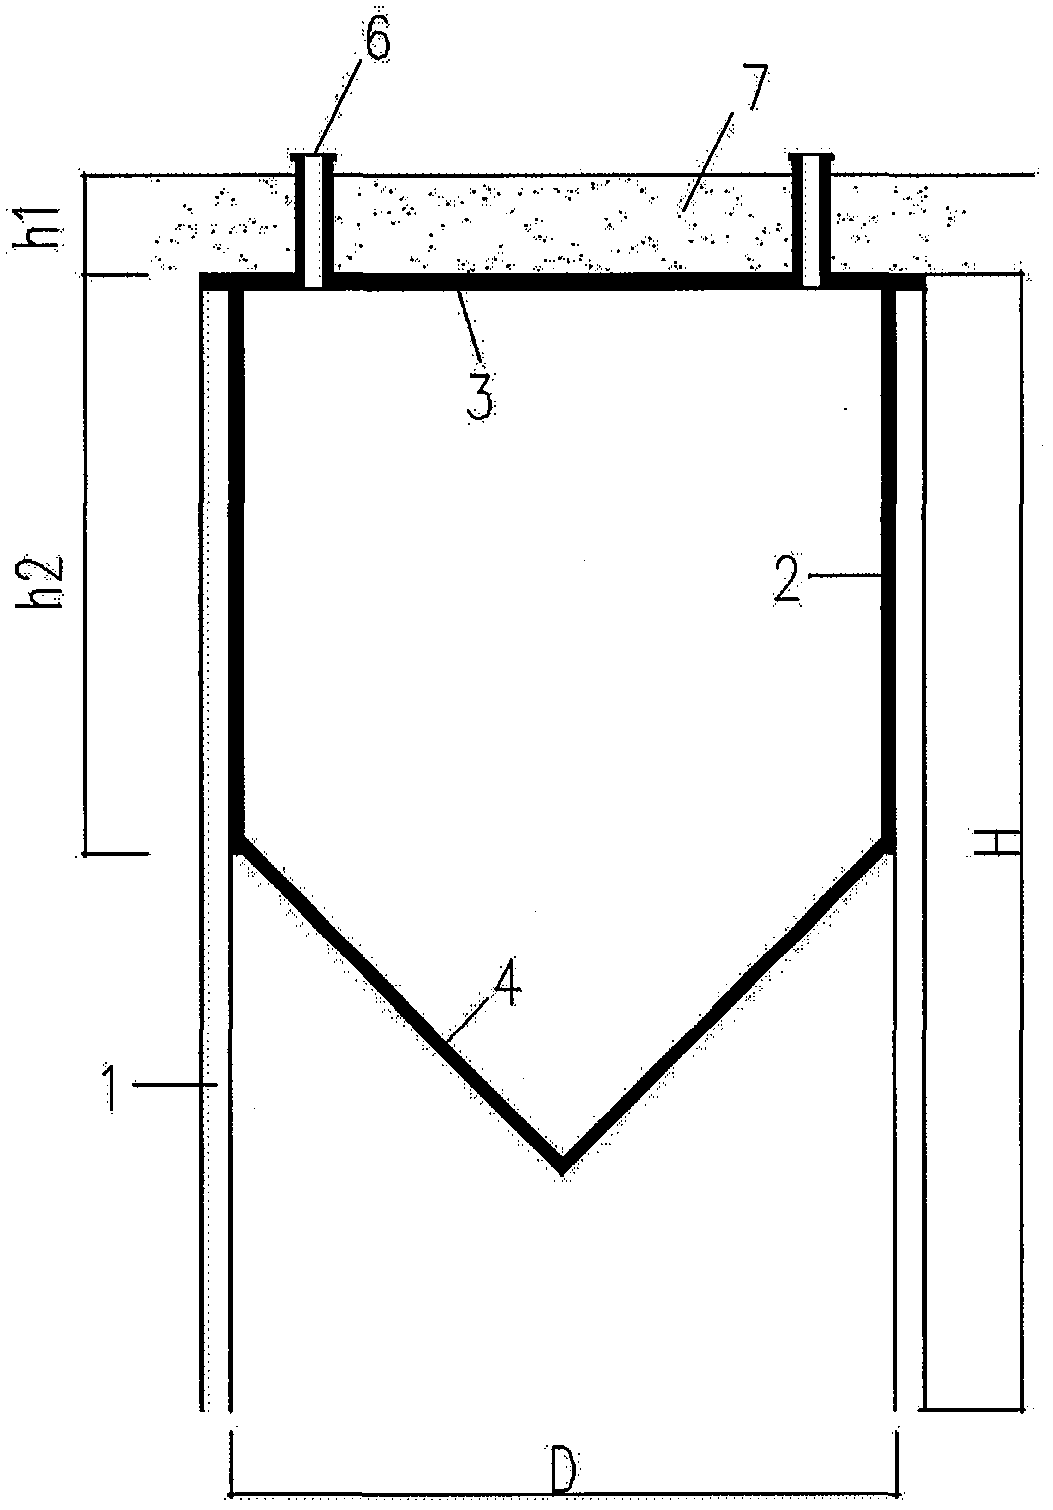 A prefabricated circular underground granary with outsourcing steel plate